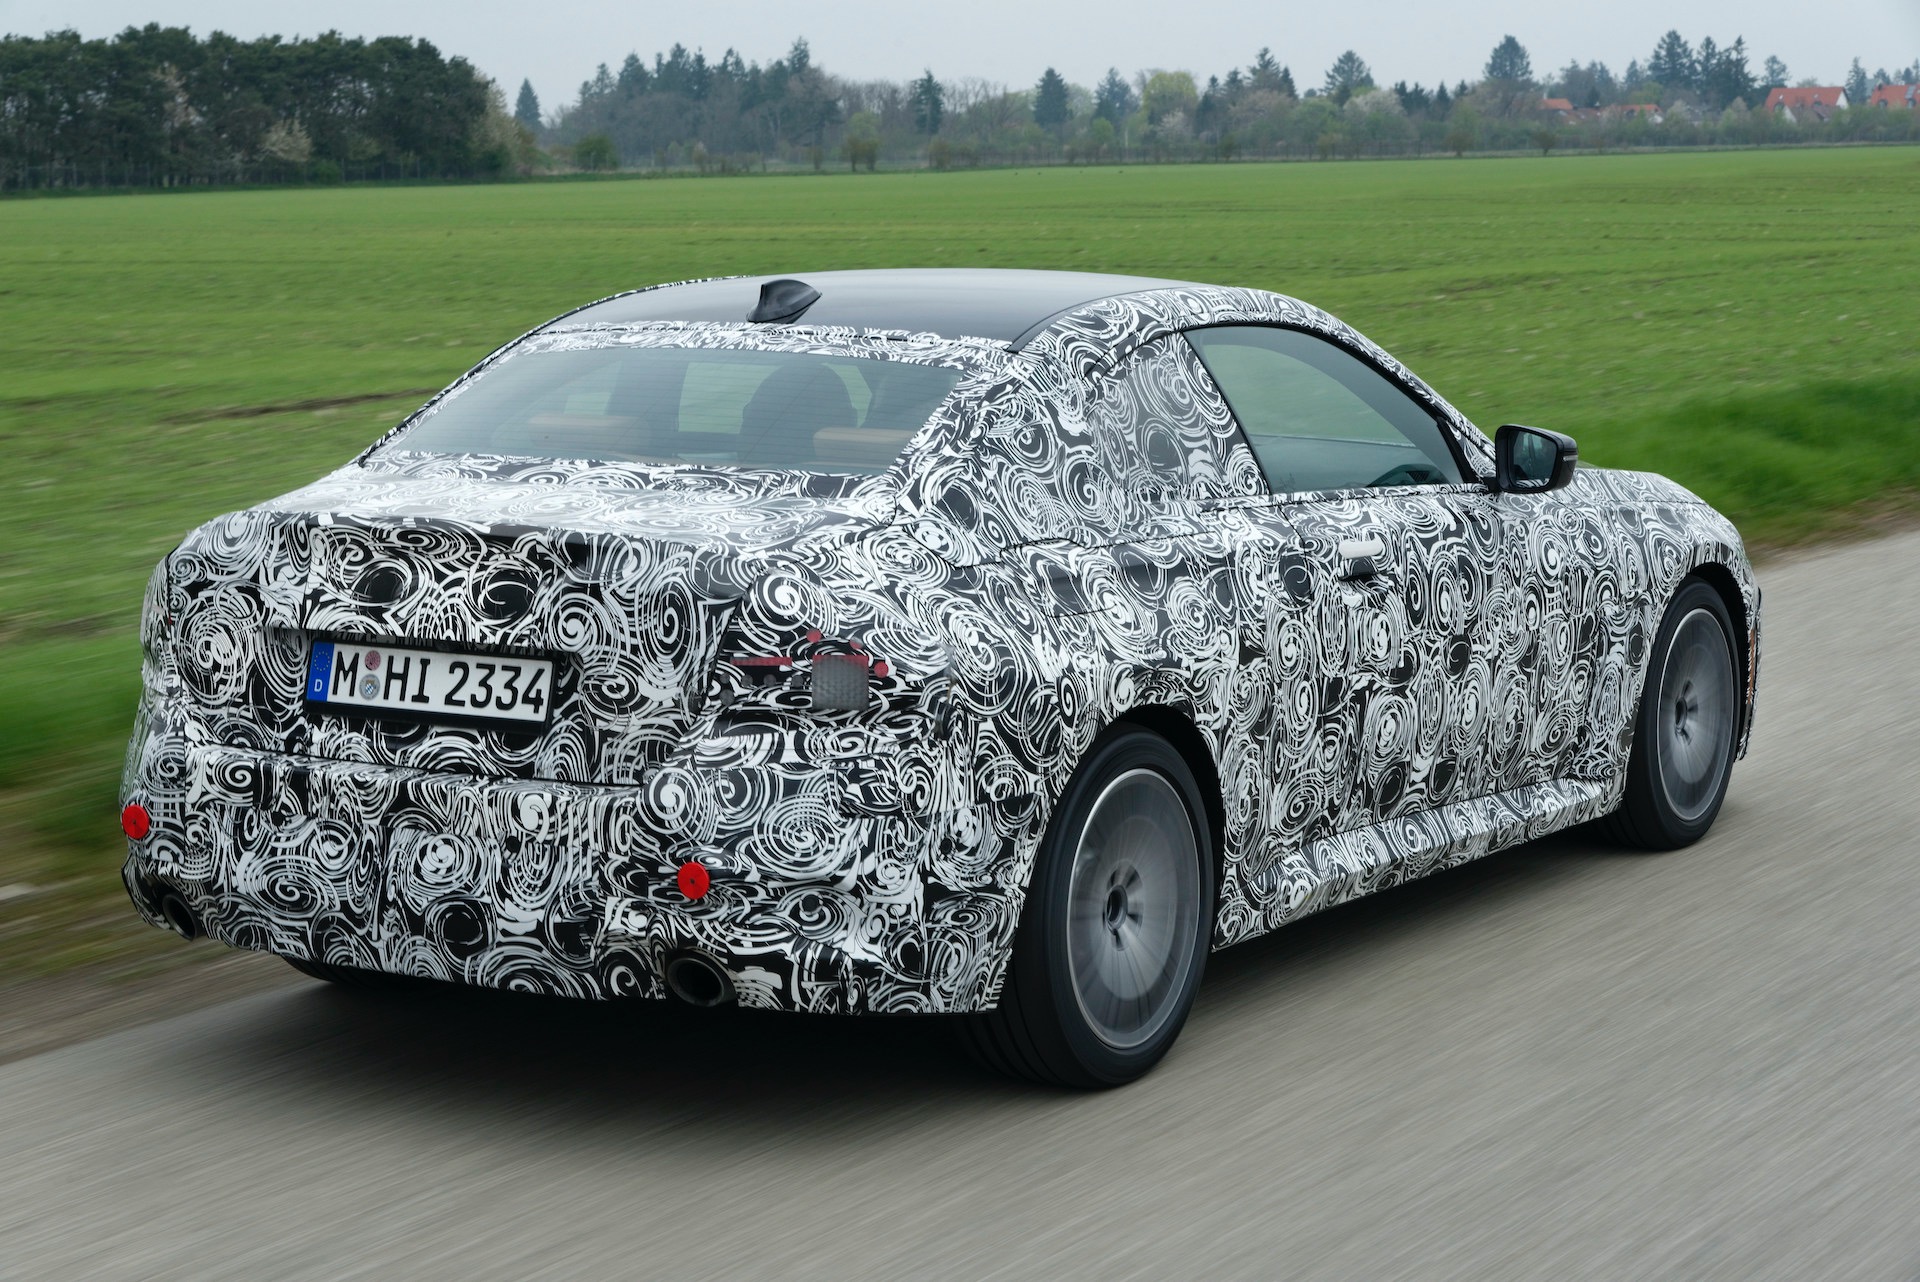 2022 BMW 2 Series coupe previewed, M240i xDrive flagship confirmed